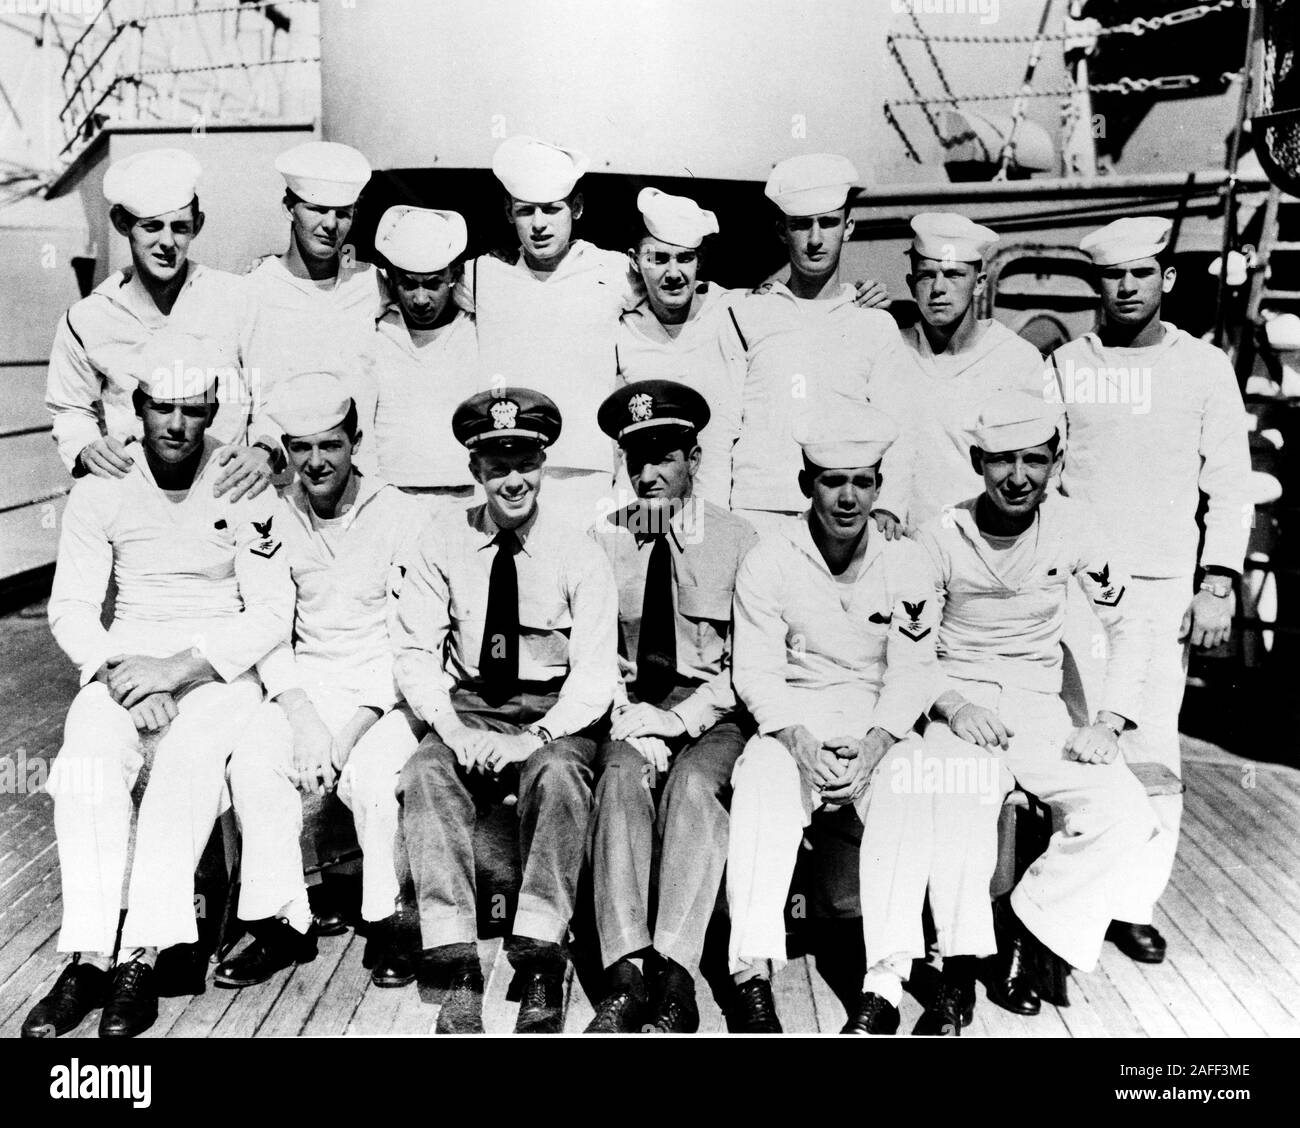 June 1947 - USA - JIMMY CARTER, C-L front row with Commander hat, smiles with the 'O' Division crew, on the Deck of USS Wyoming Ship. (Credit Image: © Keystone Press Agency/Keystone USA via ZUMAPRESS.com) Stock Photo